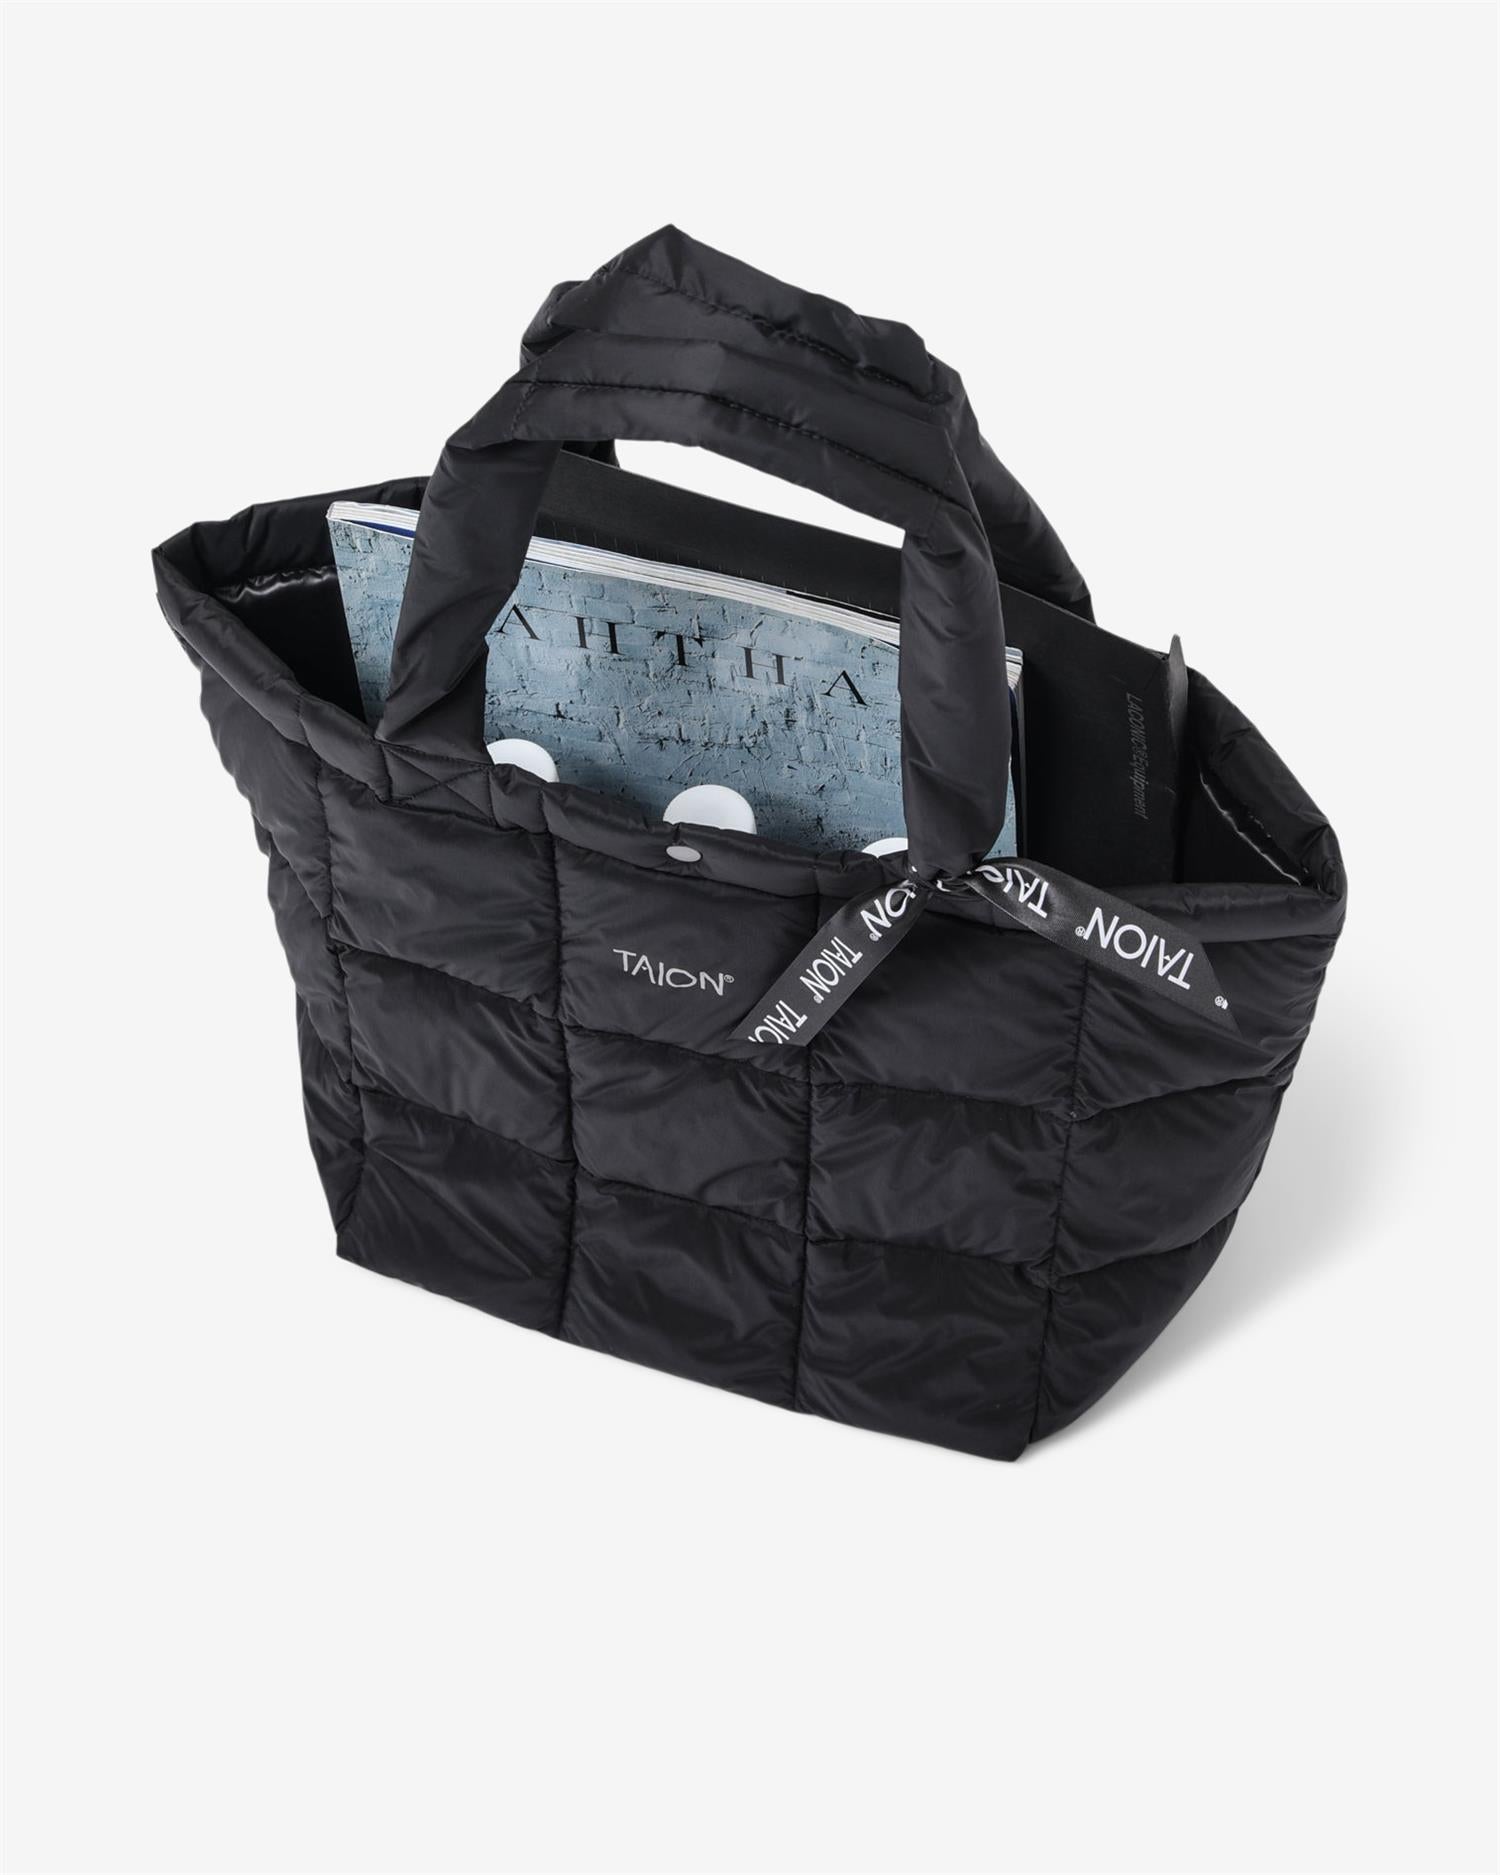 LUNCH DOWN TOTE BAG - BLACK